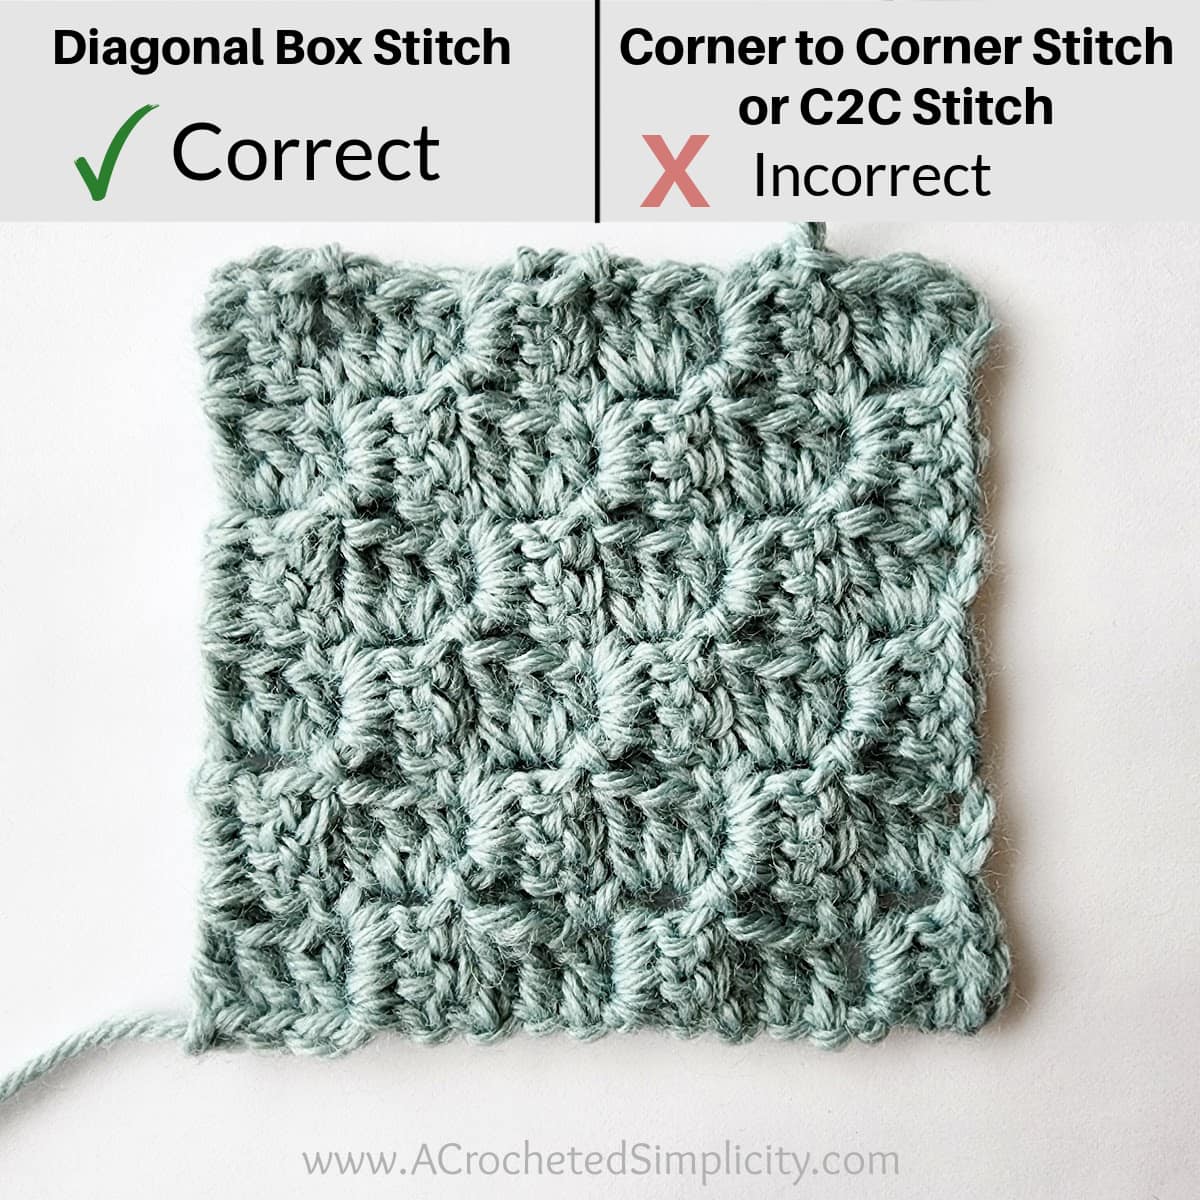 Graphic showing the diagonal box stitch is not called the C2C stitch or corner to corner stitch